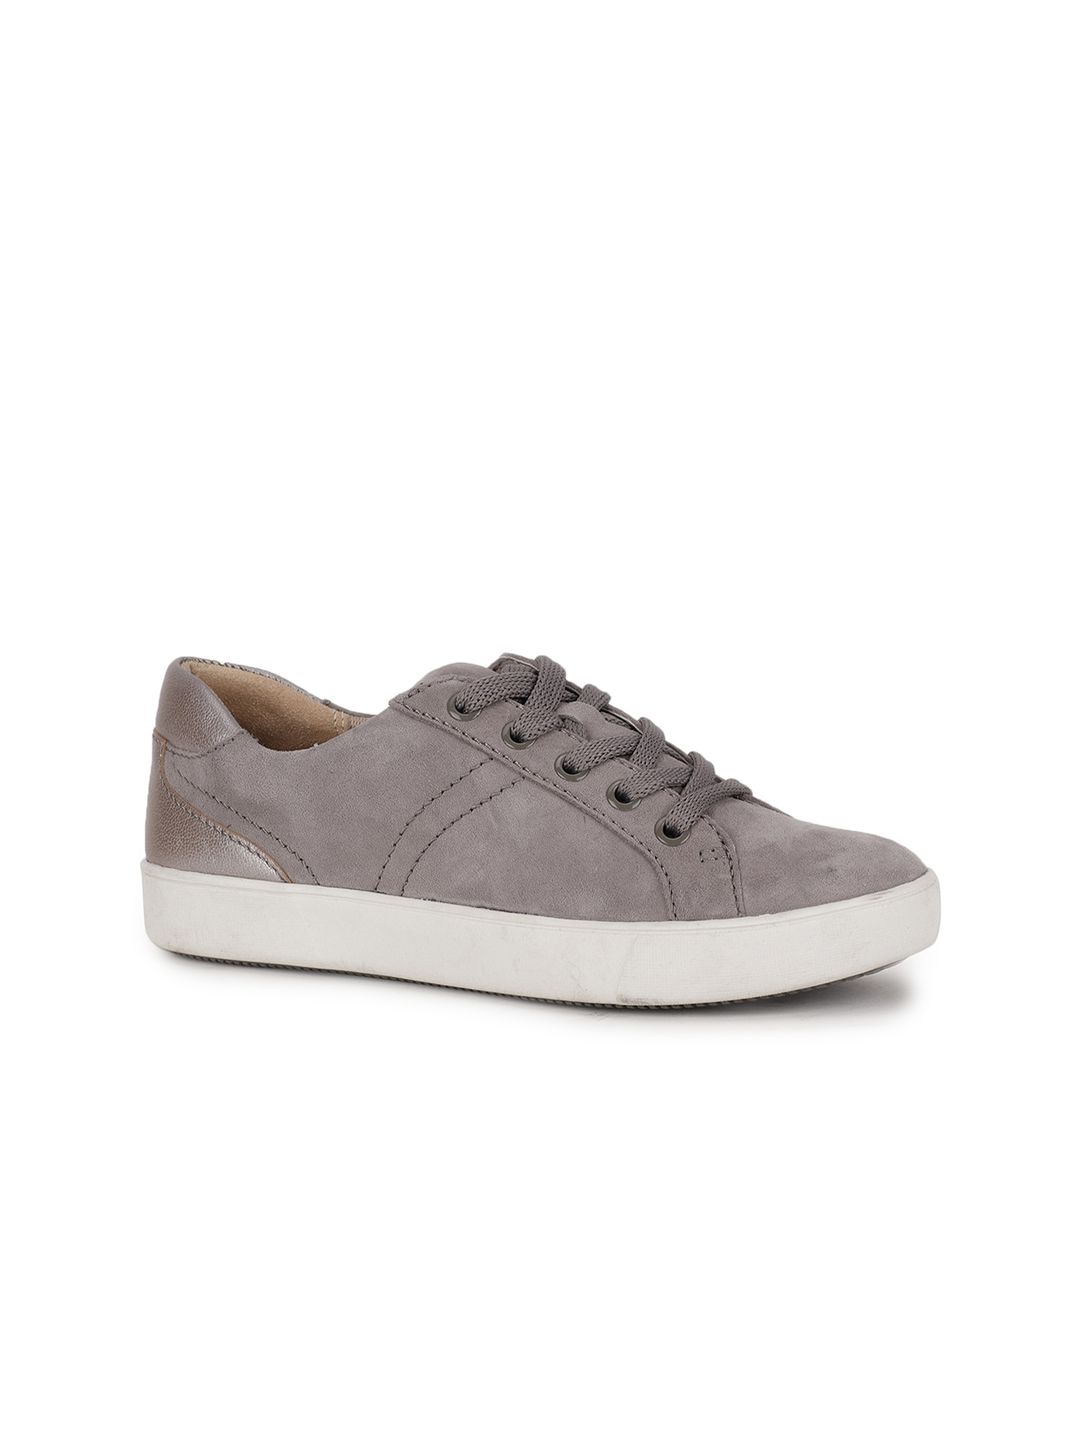 Naturalizer Women Grey Leather Sneakers Price in India